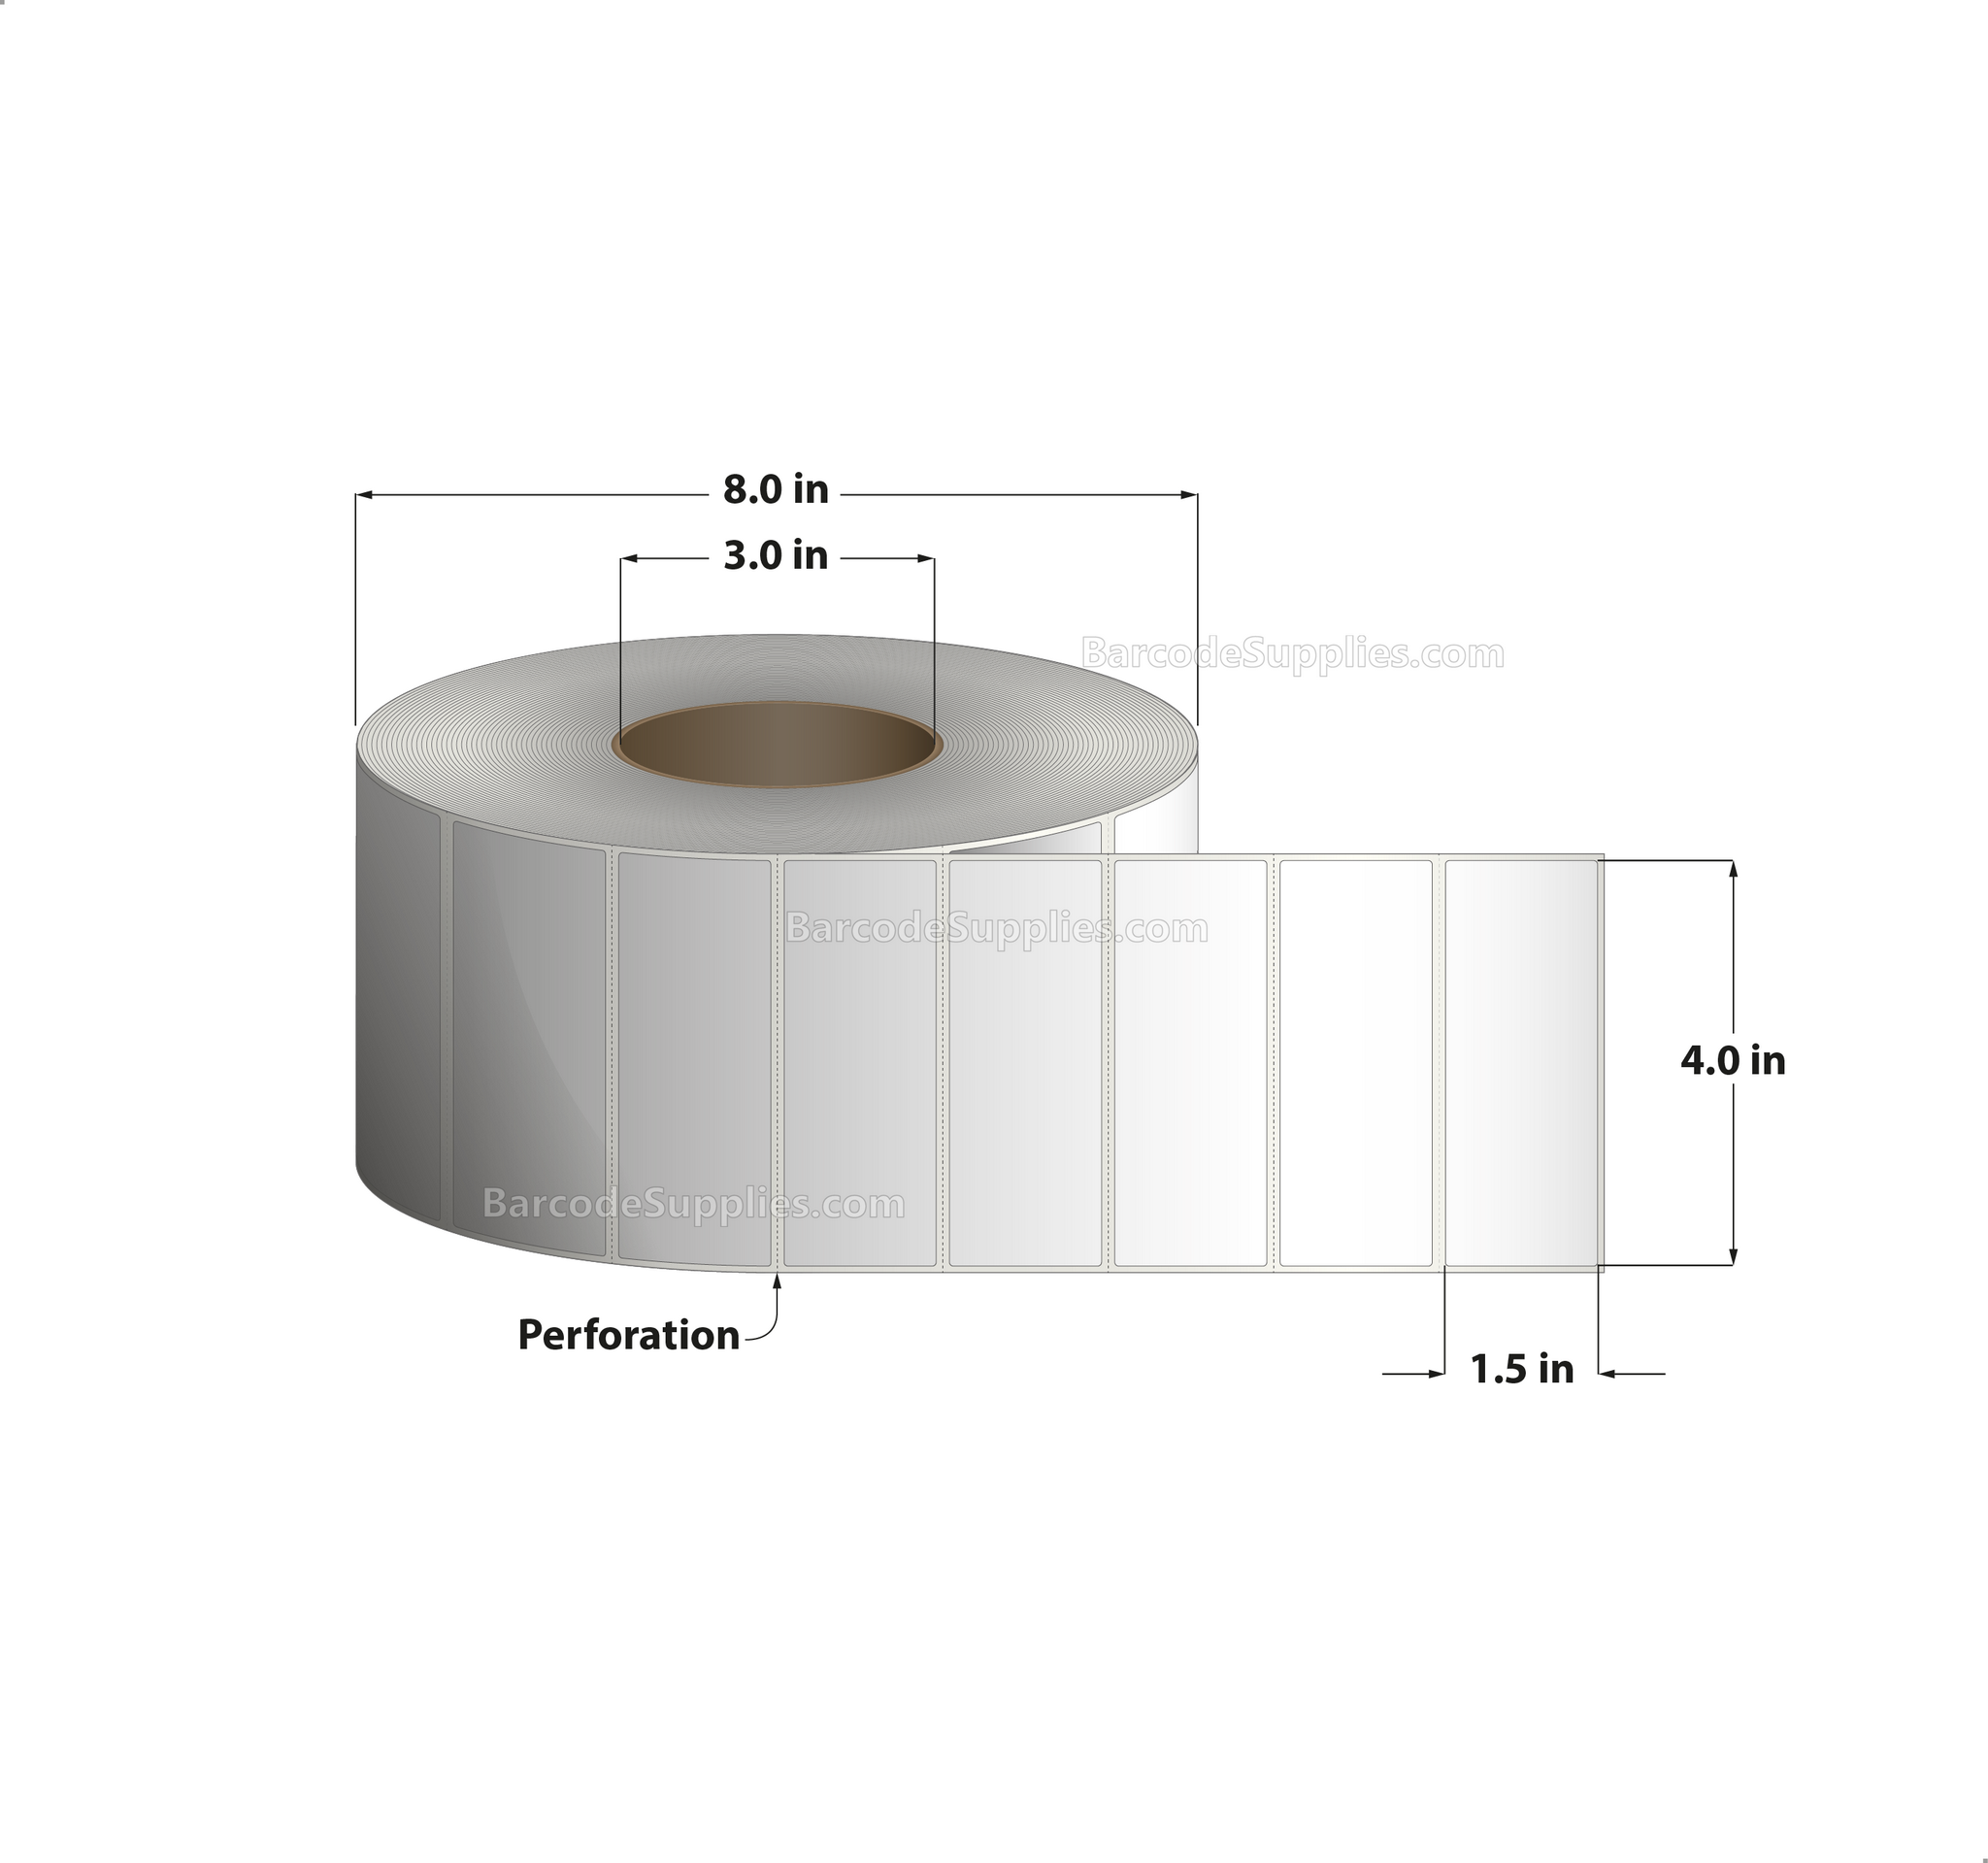 4 x 1.5 Thermal Transfer White Labels With Permanent Adhesive - Perforated - 3600 Labels Per Roll - Carton Of 4 Rolls - 14400 Labels Total - MPN: RT-4-15-3600-3